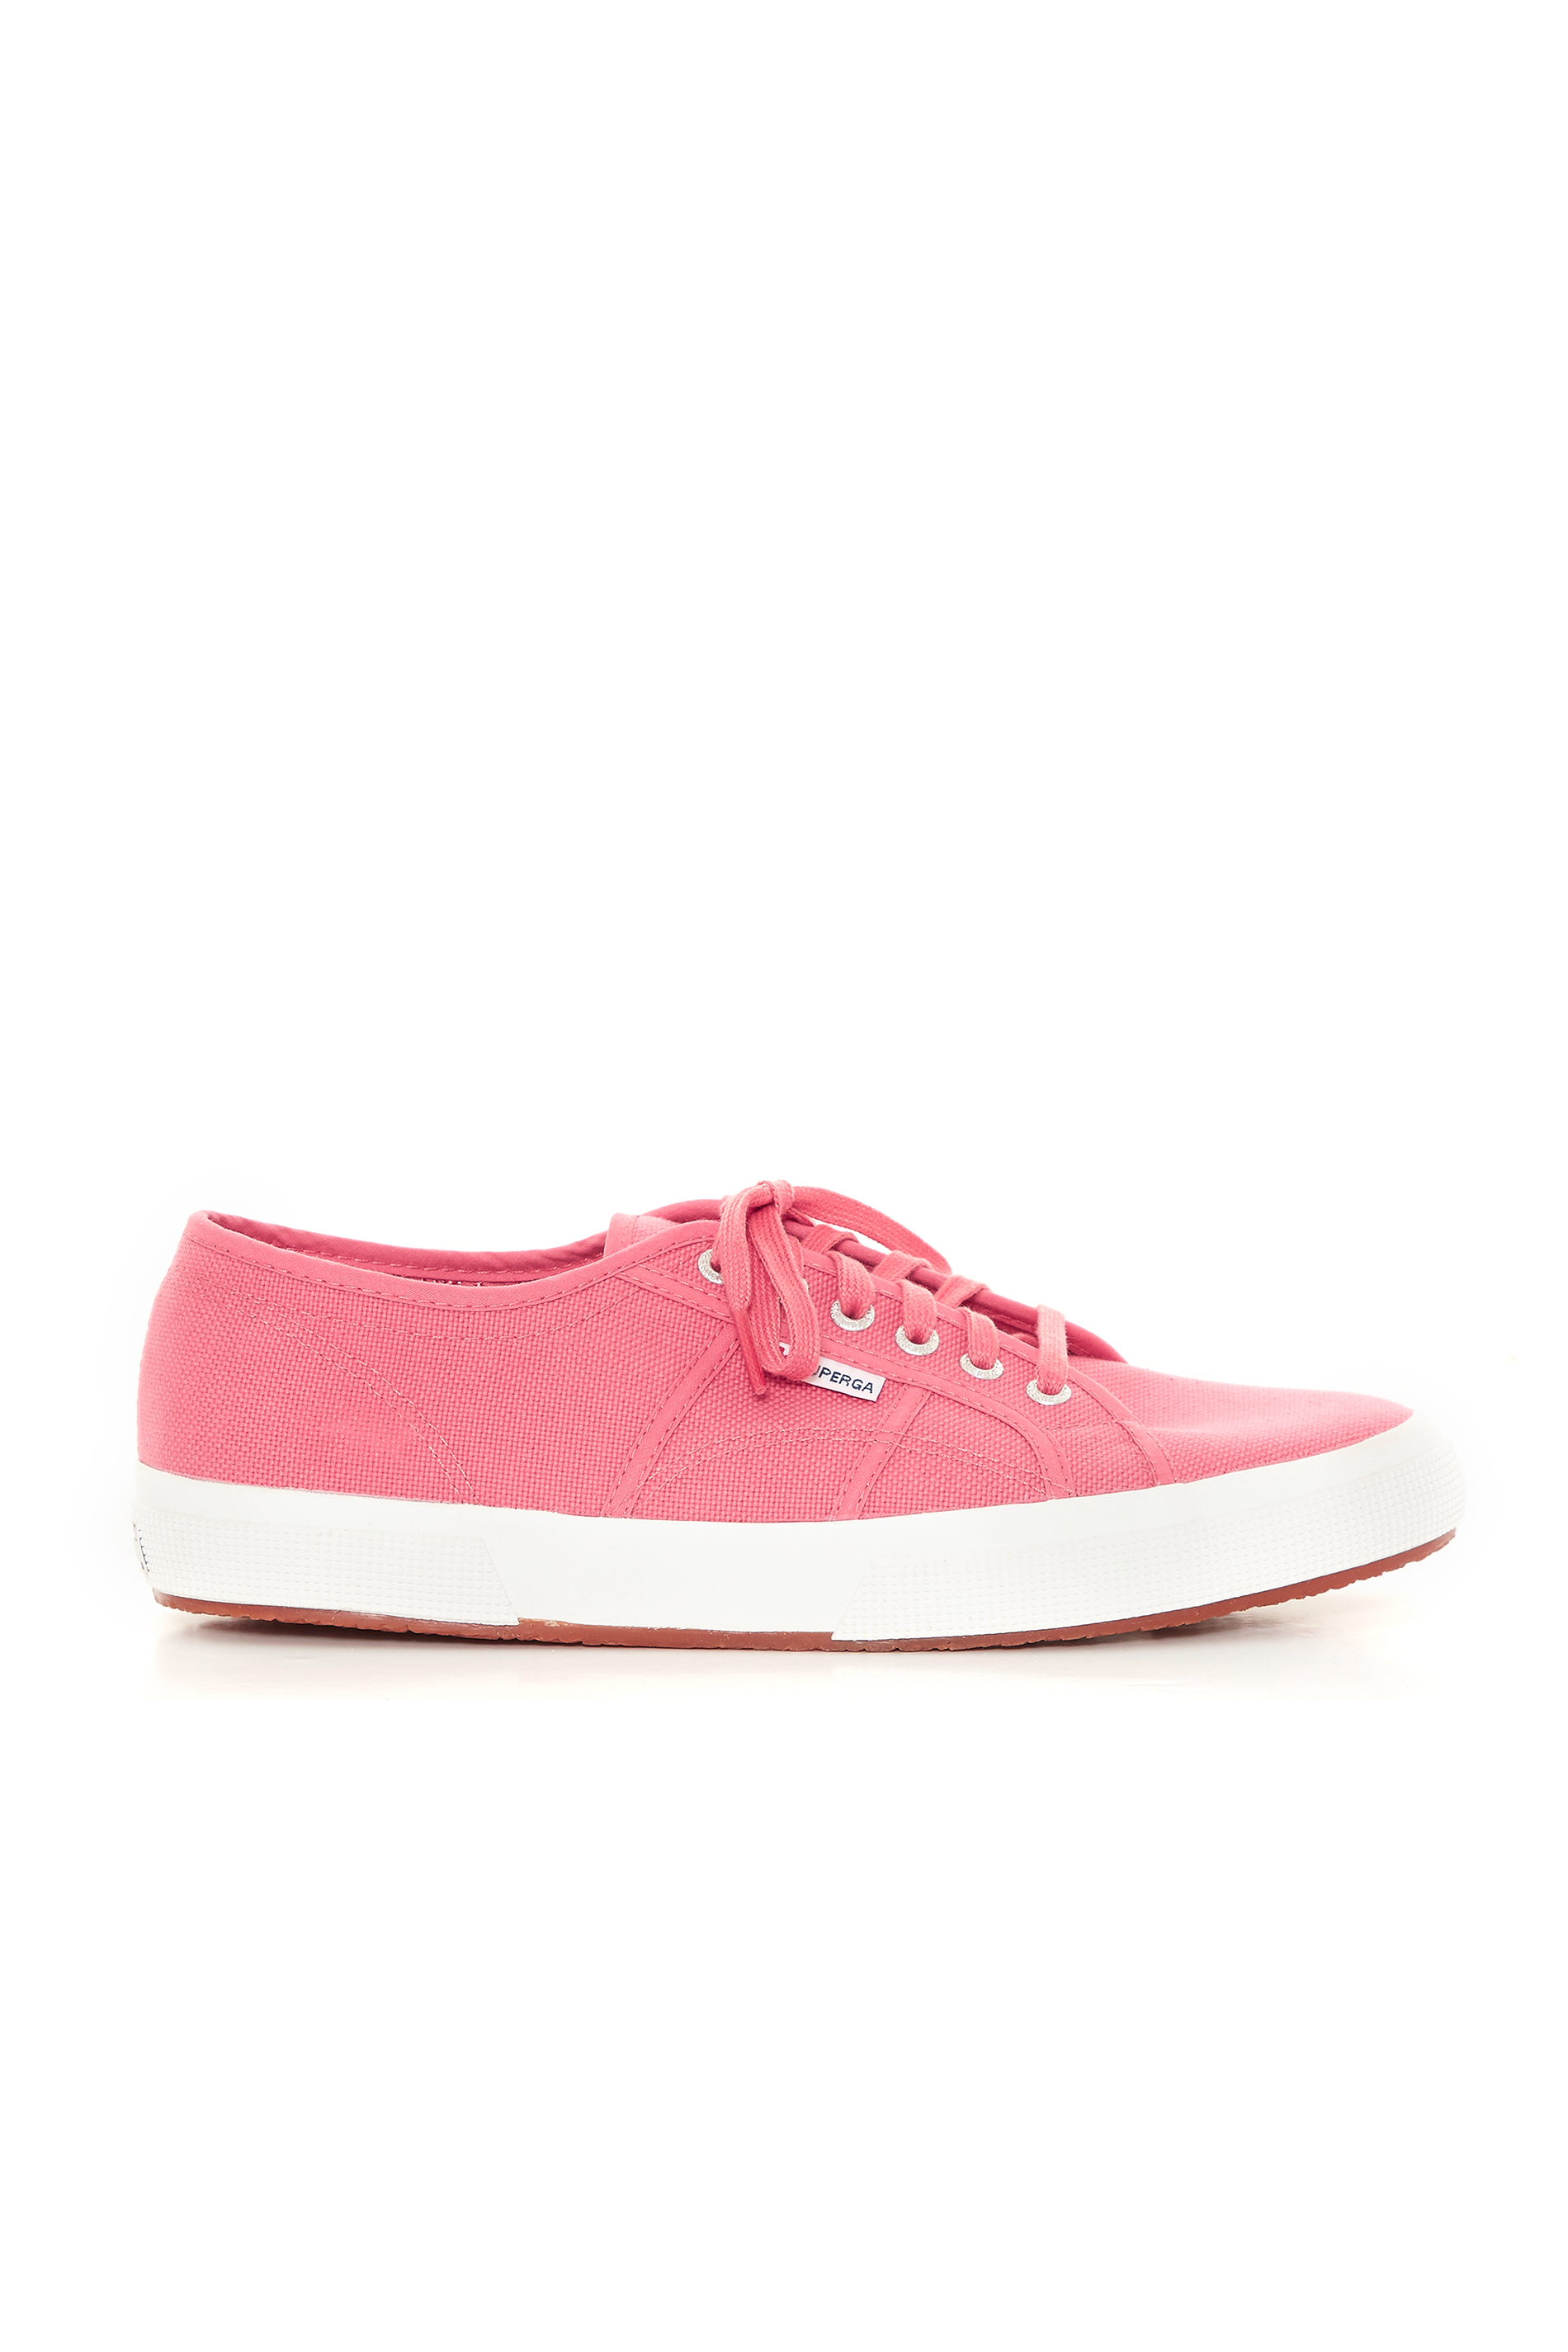 SUPERGA 2750 Pink Cotu Canvas Trainer | Long Tall Sally